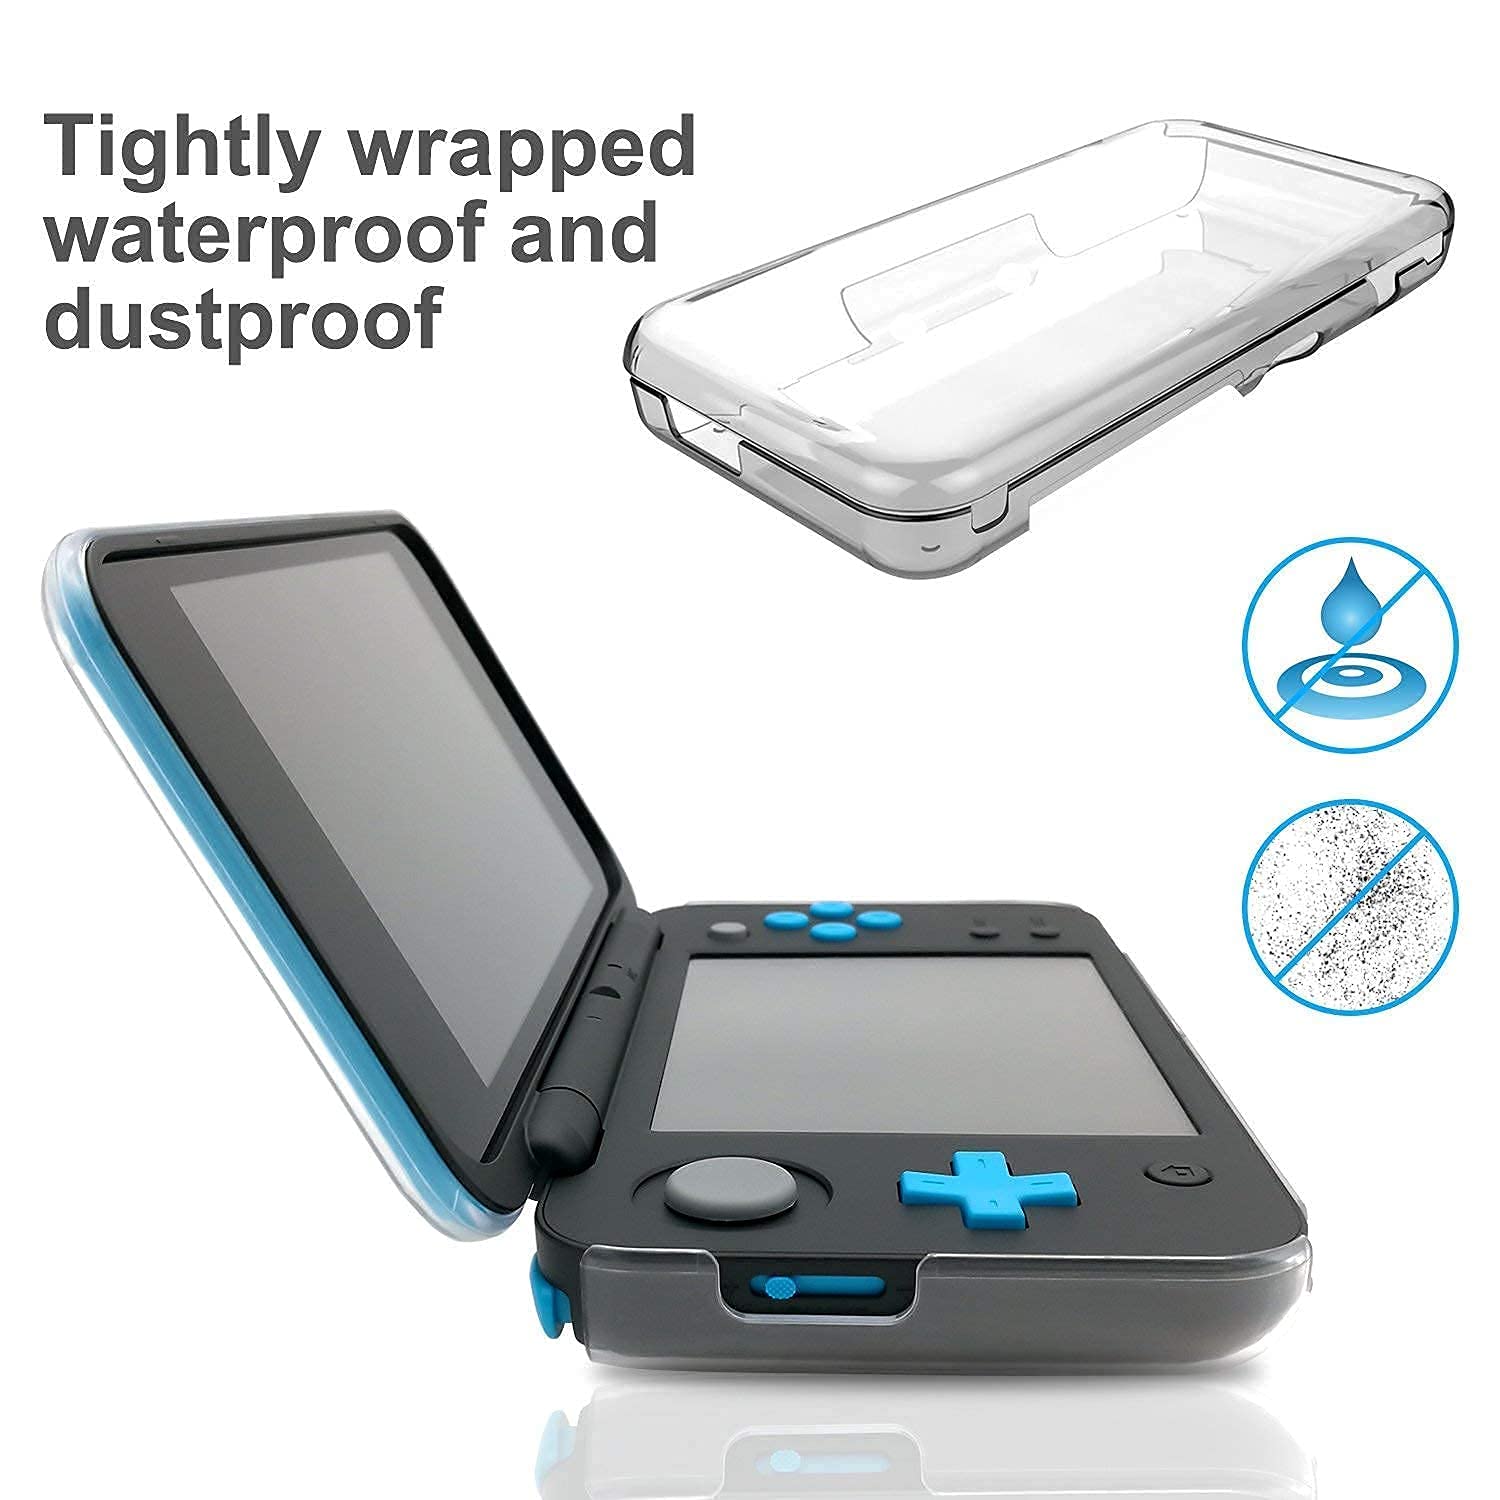 Crystal Clear Case for New Nintendo 2DS XL and for New Nintendo 2DS XL with Stylus,2 Screen Protector Film and 8 pcs Game Card Cases